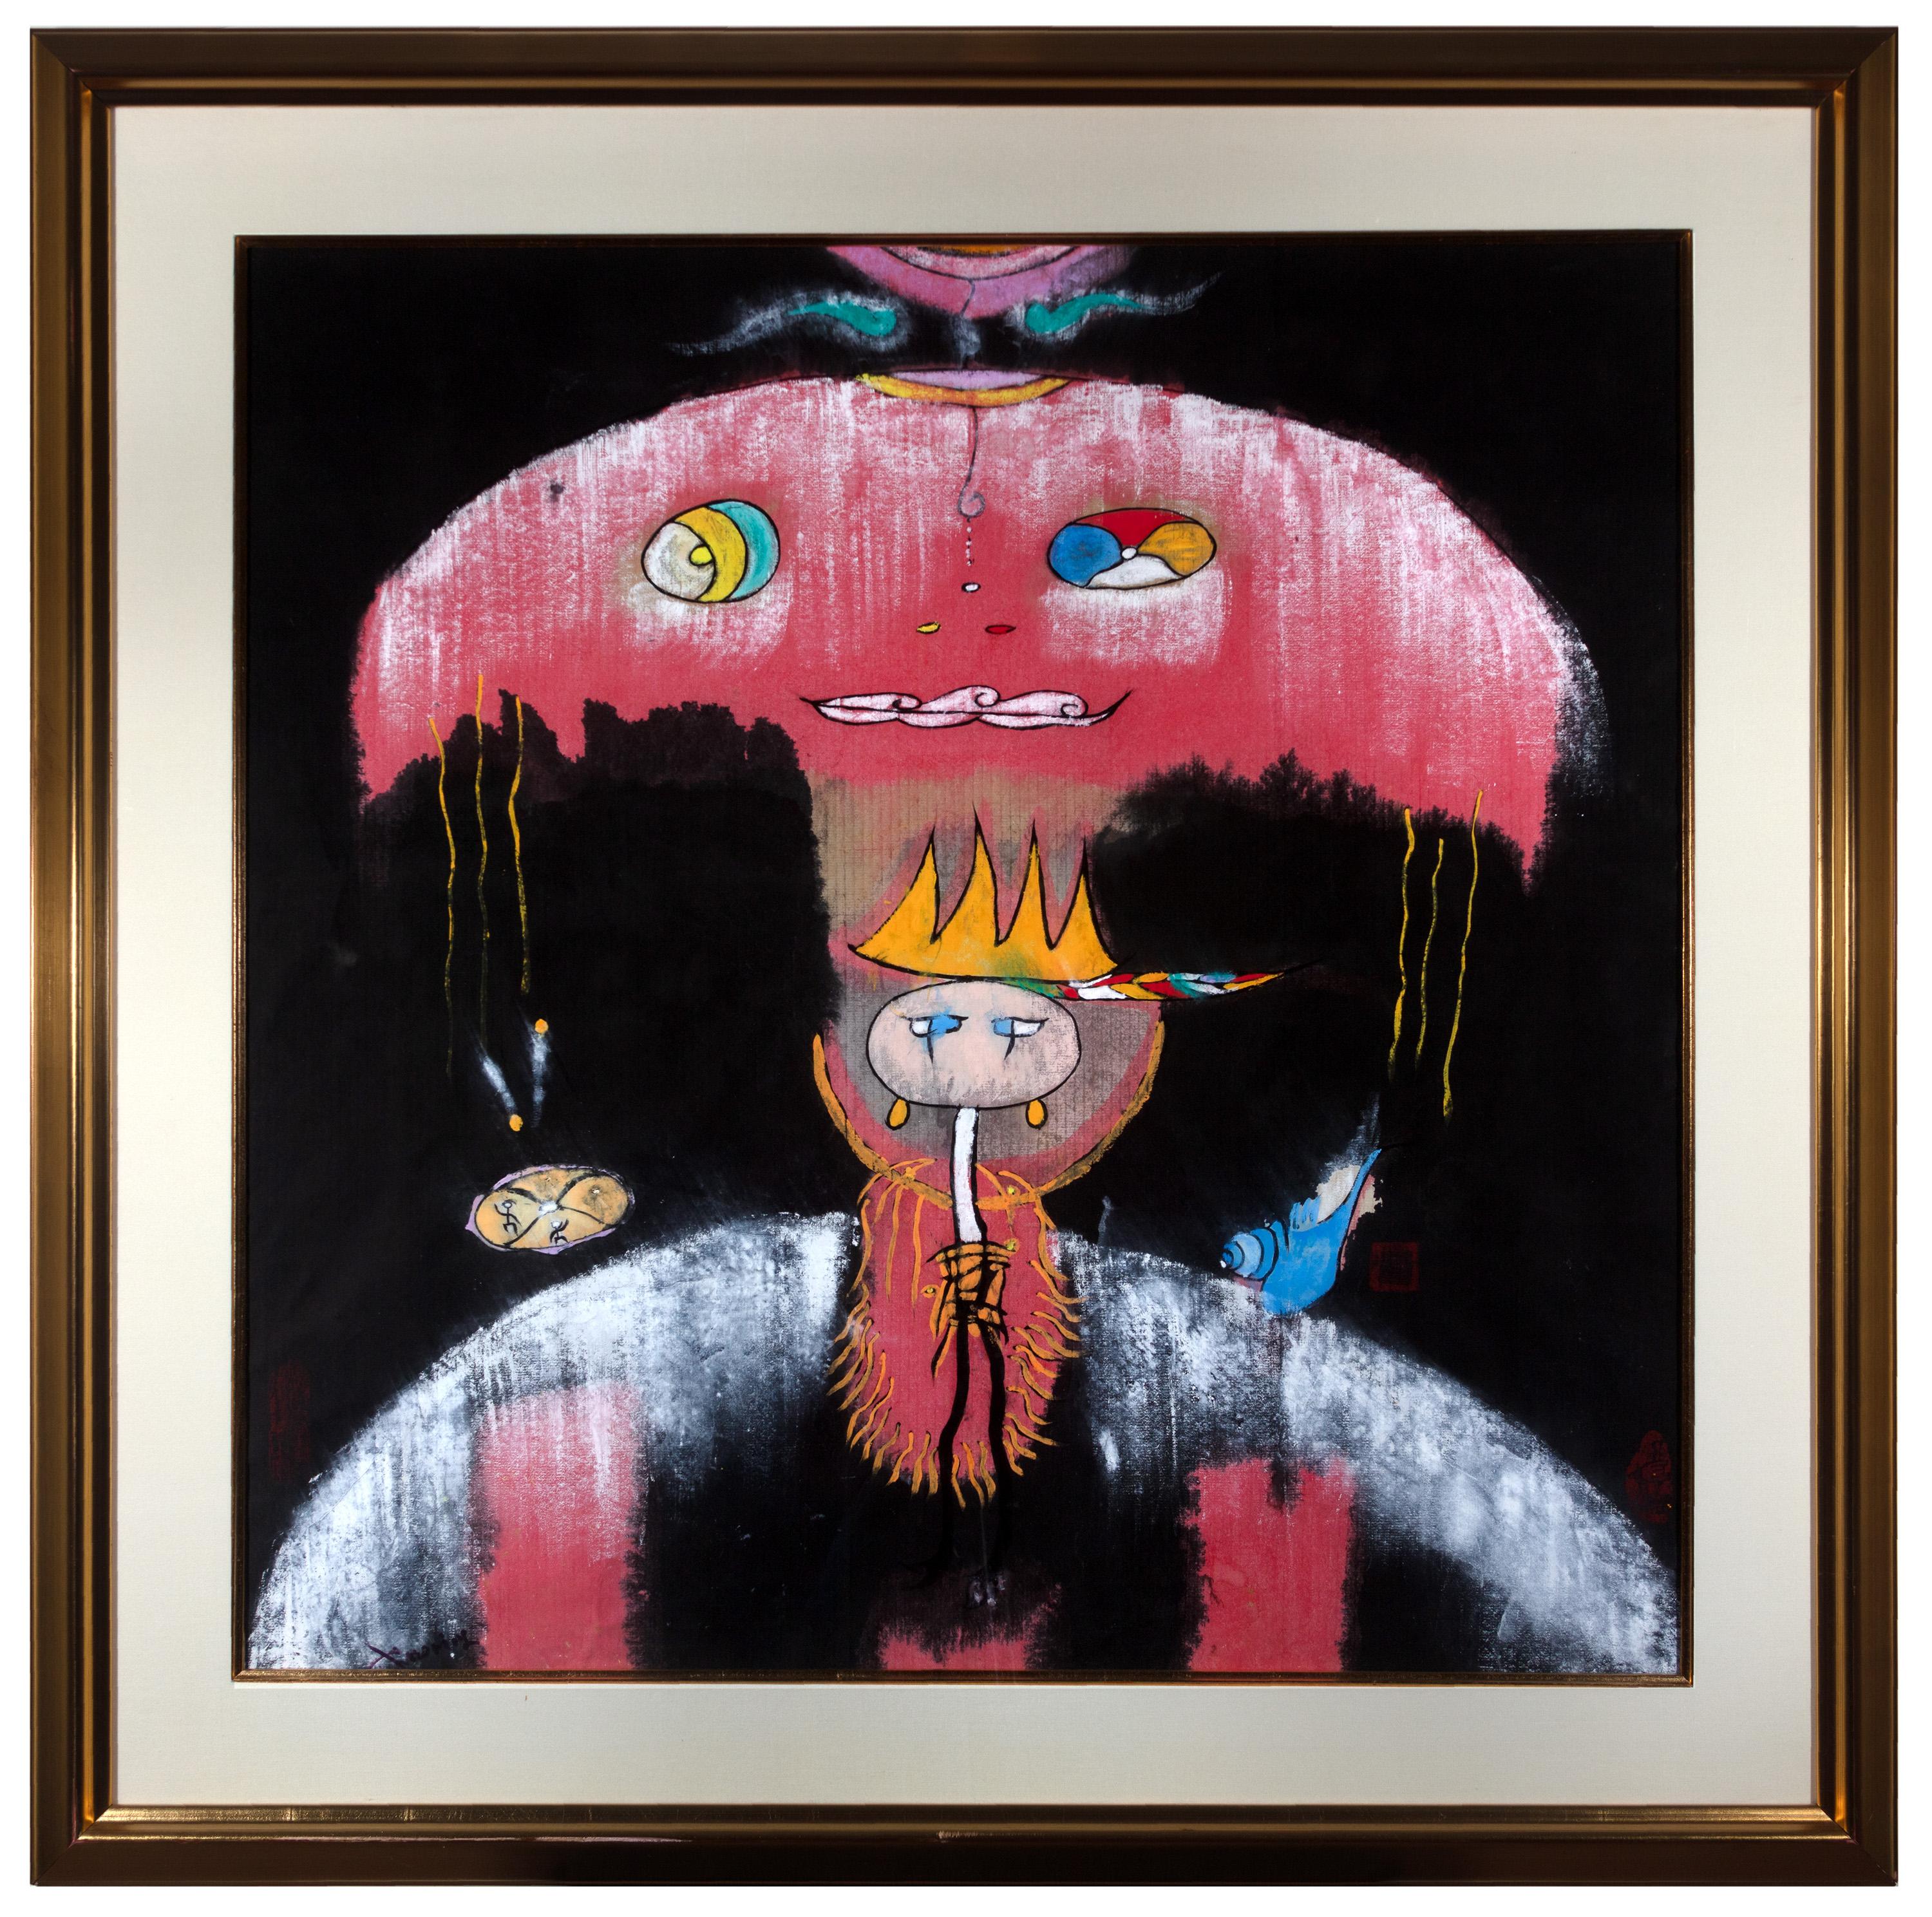 "Sky Eye 2" is a mixed media on paper by emerging contemporary Chinese artist Xiao Ming.

34 1/4" x 34 1/4" art
43 1/2" x 43 5/8" framed

Born in the Yunnan province of China, close to Tibet, Xiao Ming founds her artwork on her beliefs and